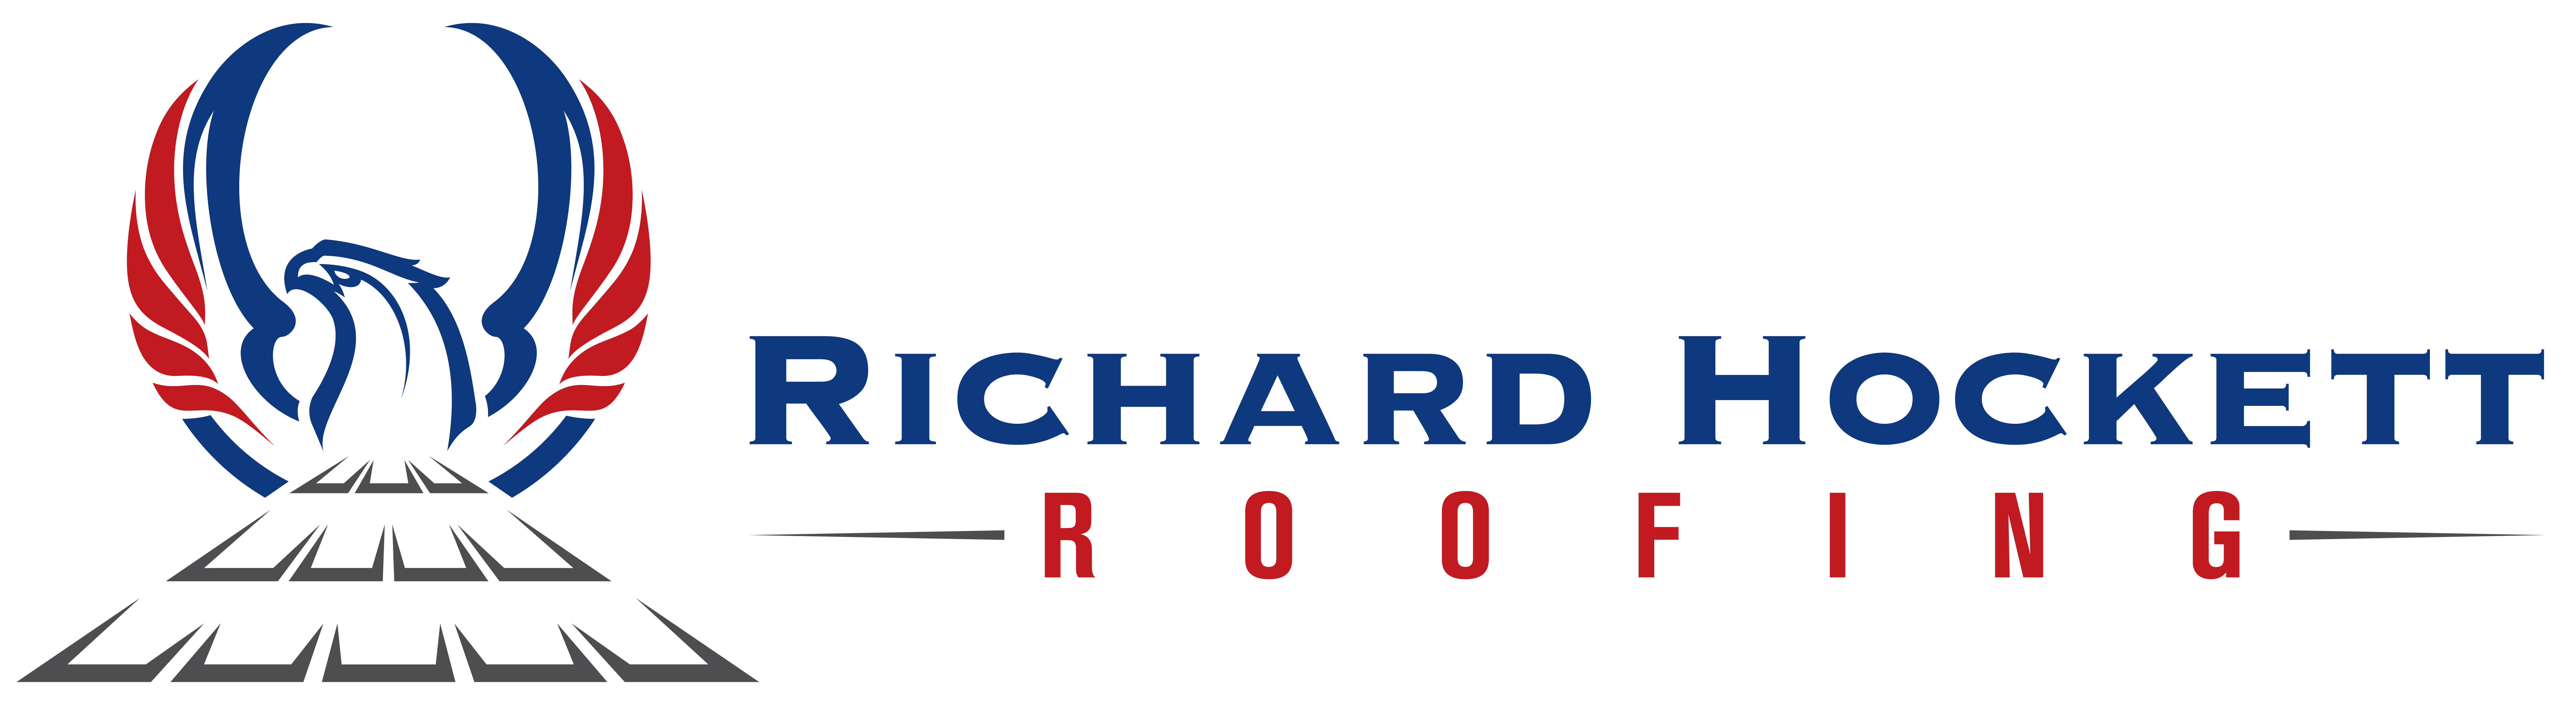 Company logo of Richard Hockett Roofing, symbolizing our brand's commitment to quality, trust, and excellence in roofing services.